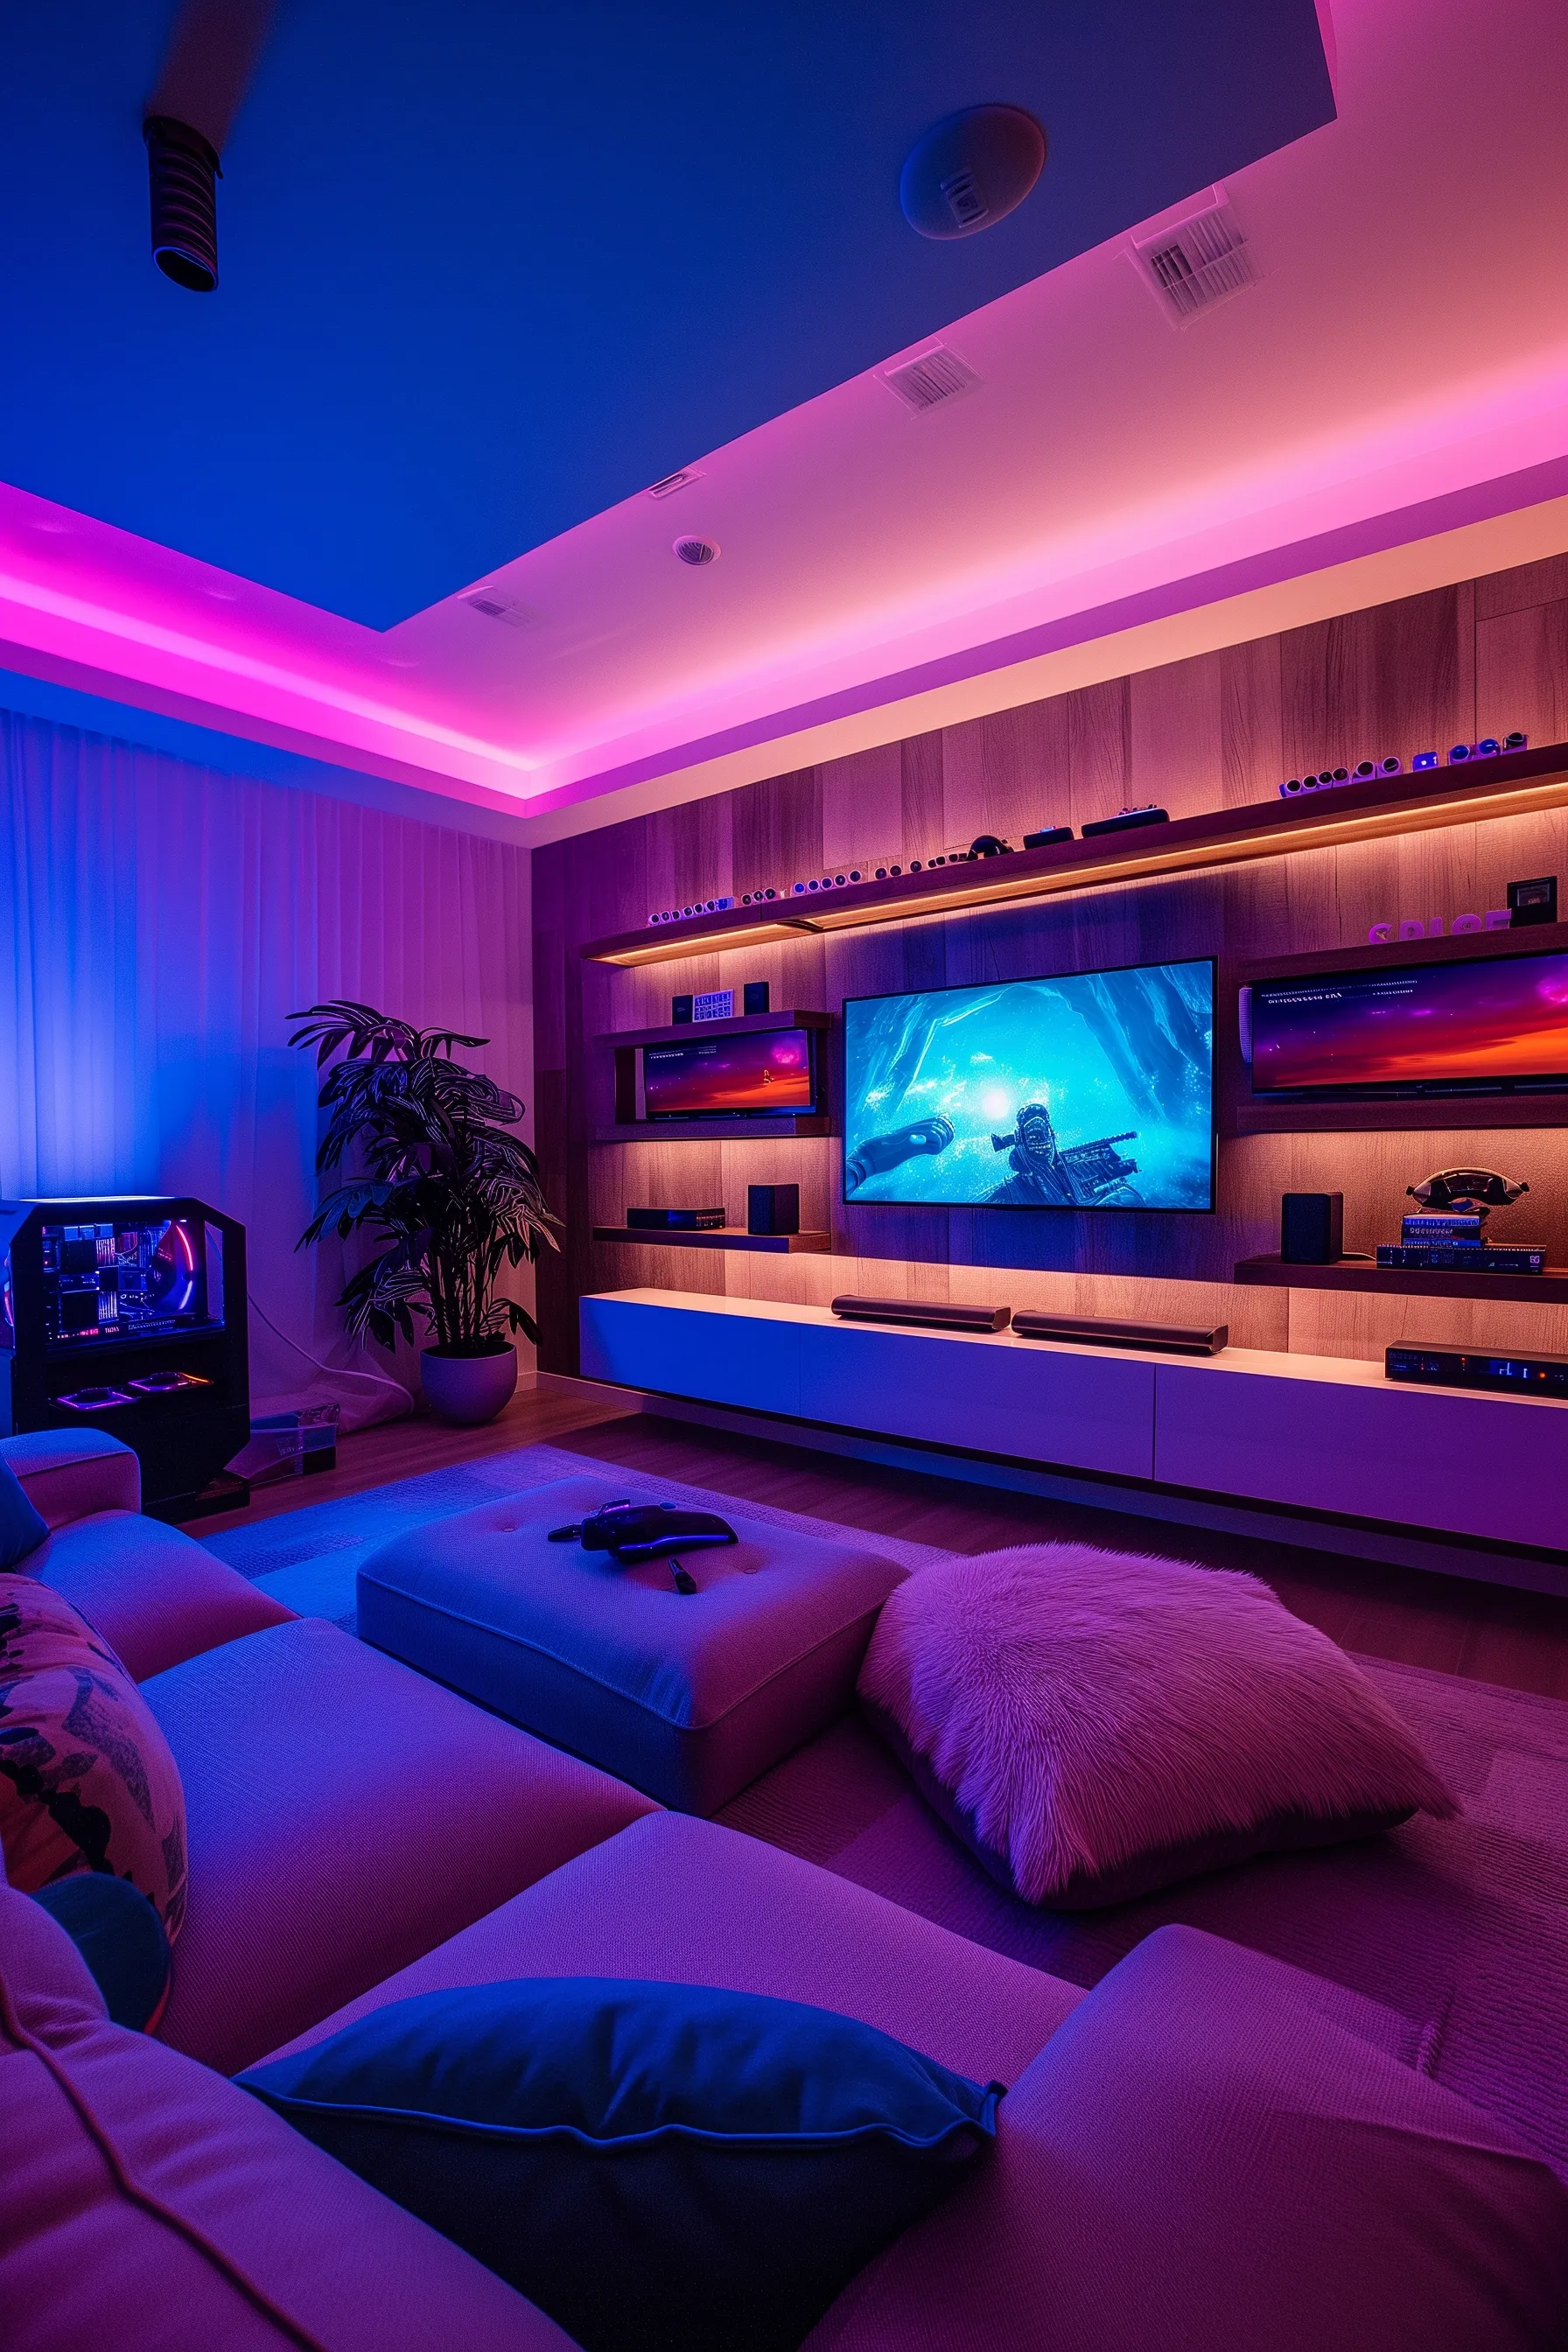 Game room with a comfortable couch and LED lights